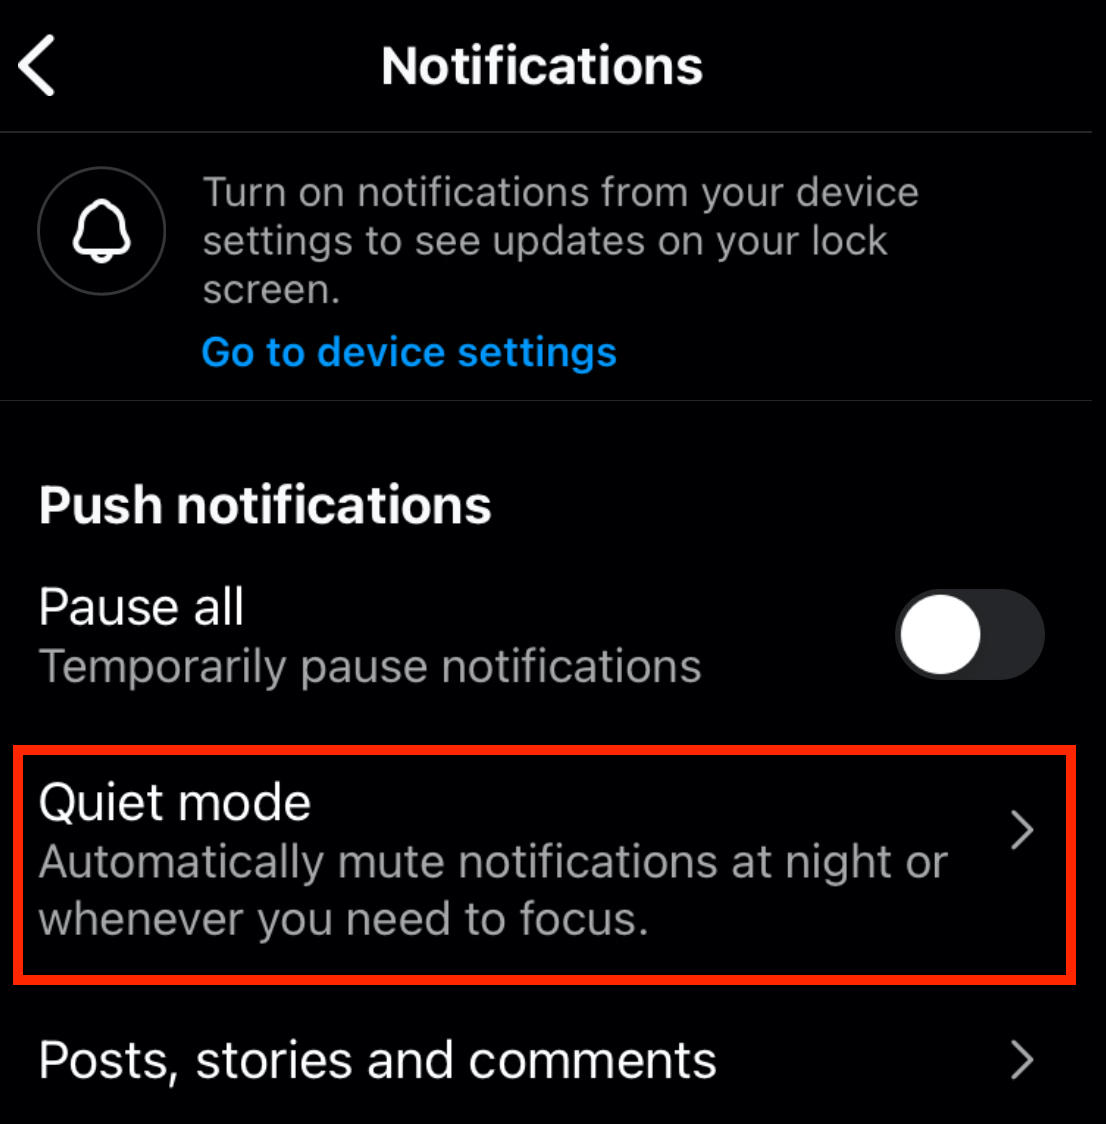 Instagram Quite Mode: How to Turn It On and Use It